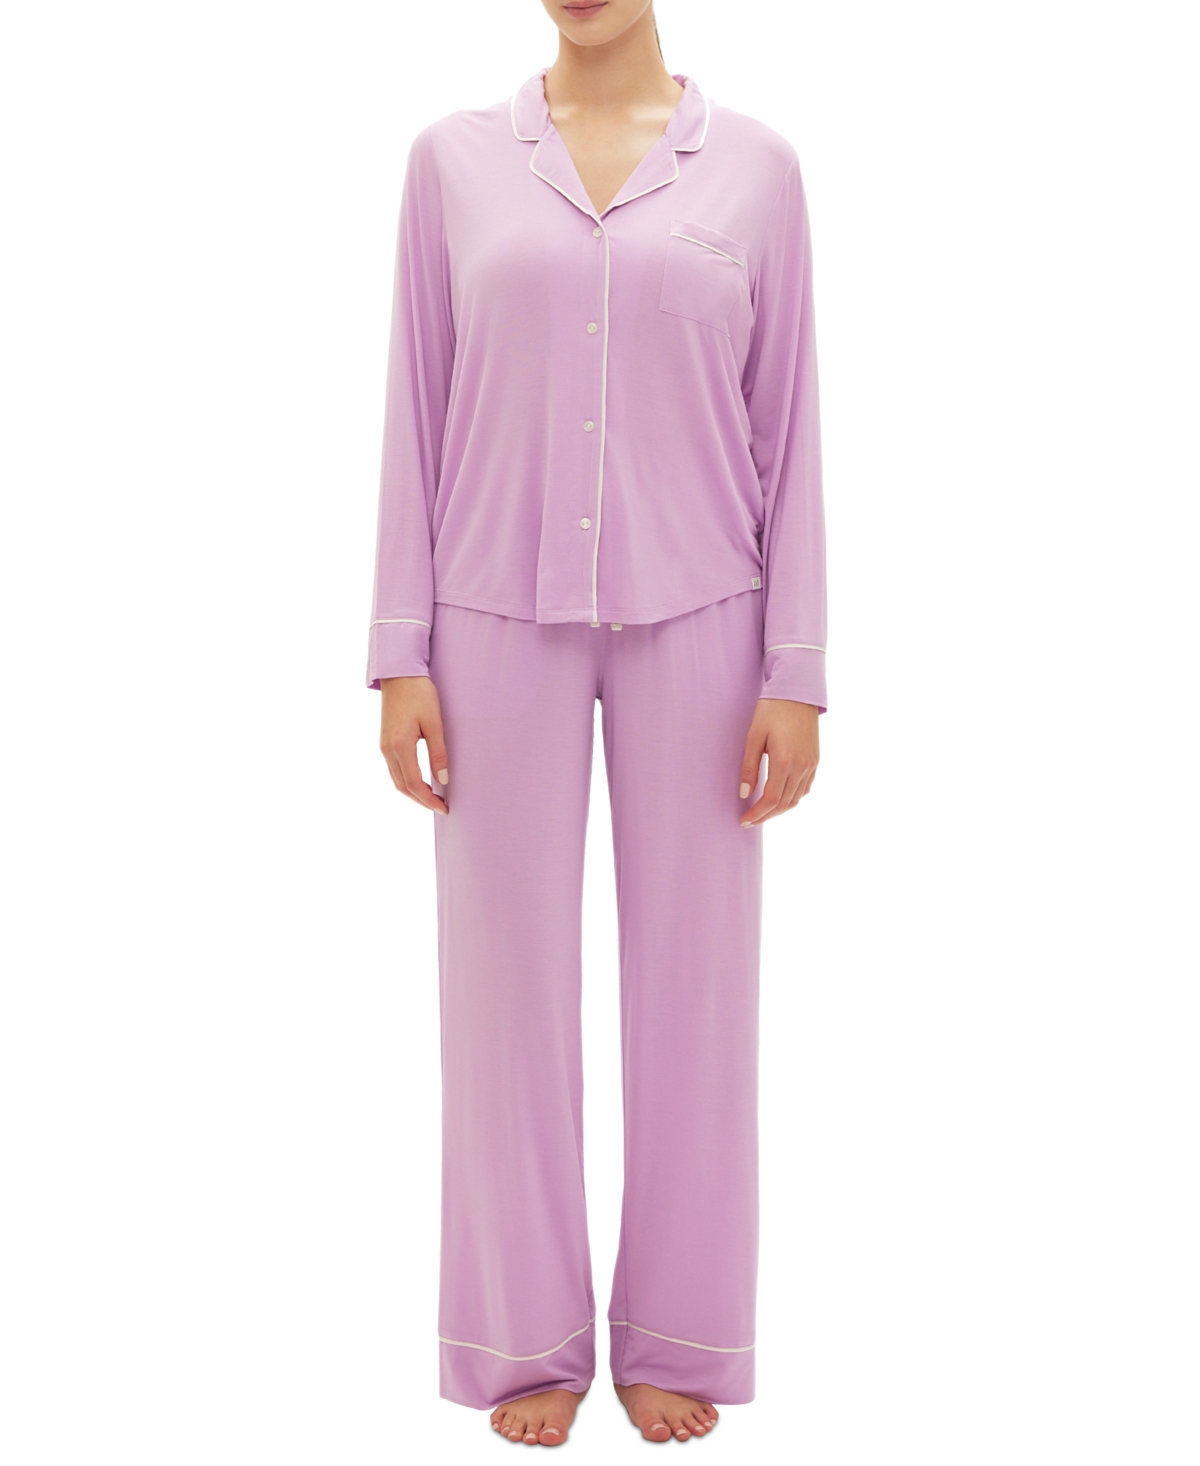 Gap Body Women's 2-pc. Notched-collar Long-sleeve Pajamas Set In Purple Orchid